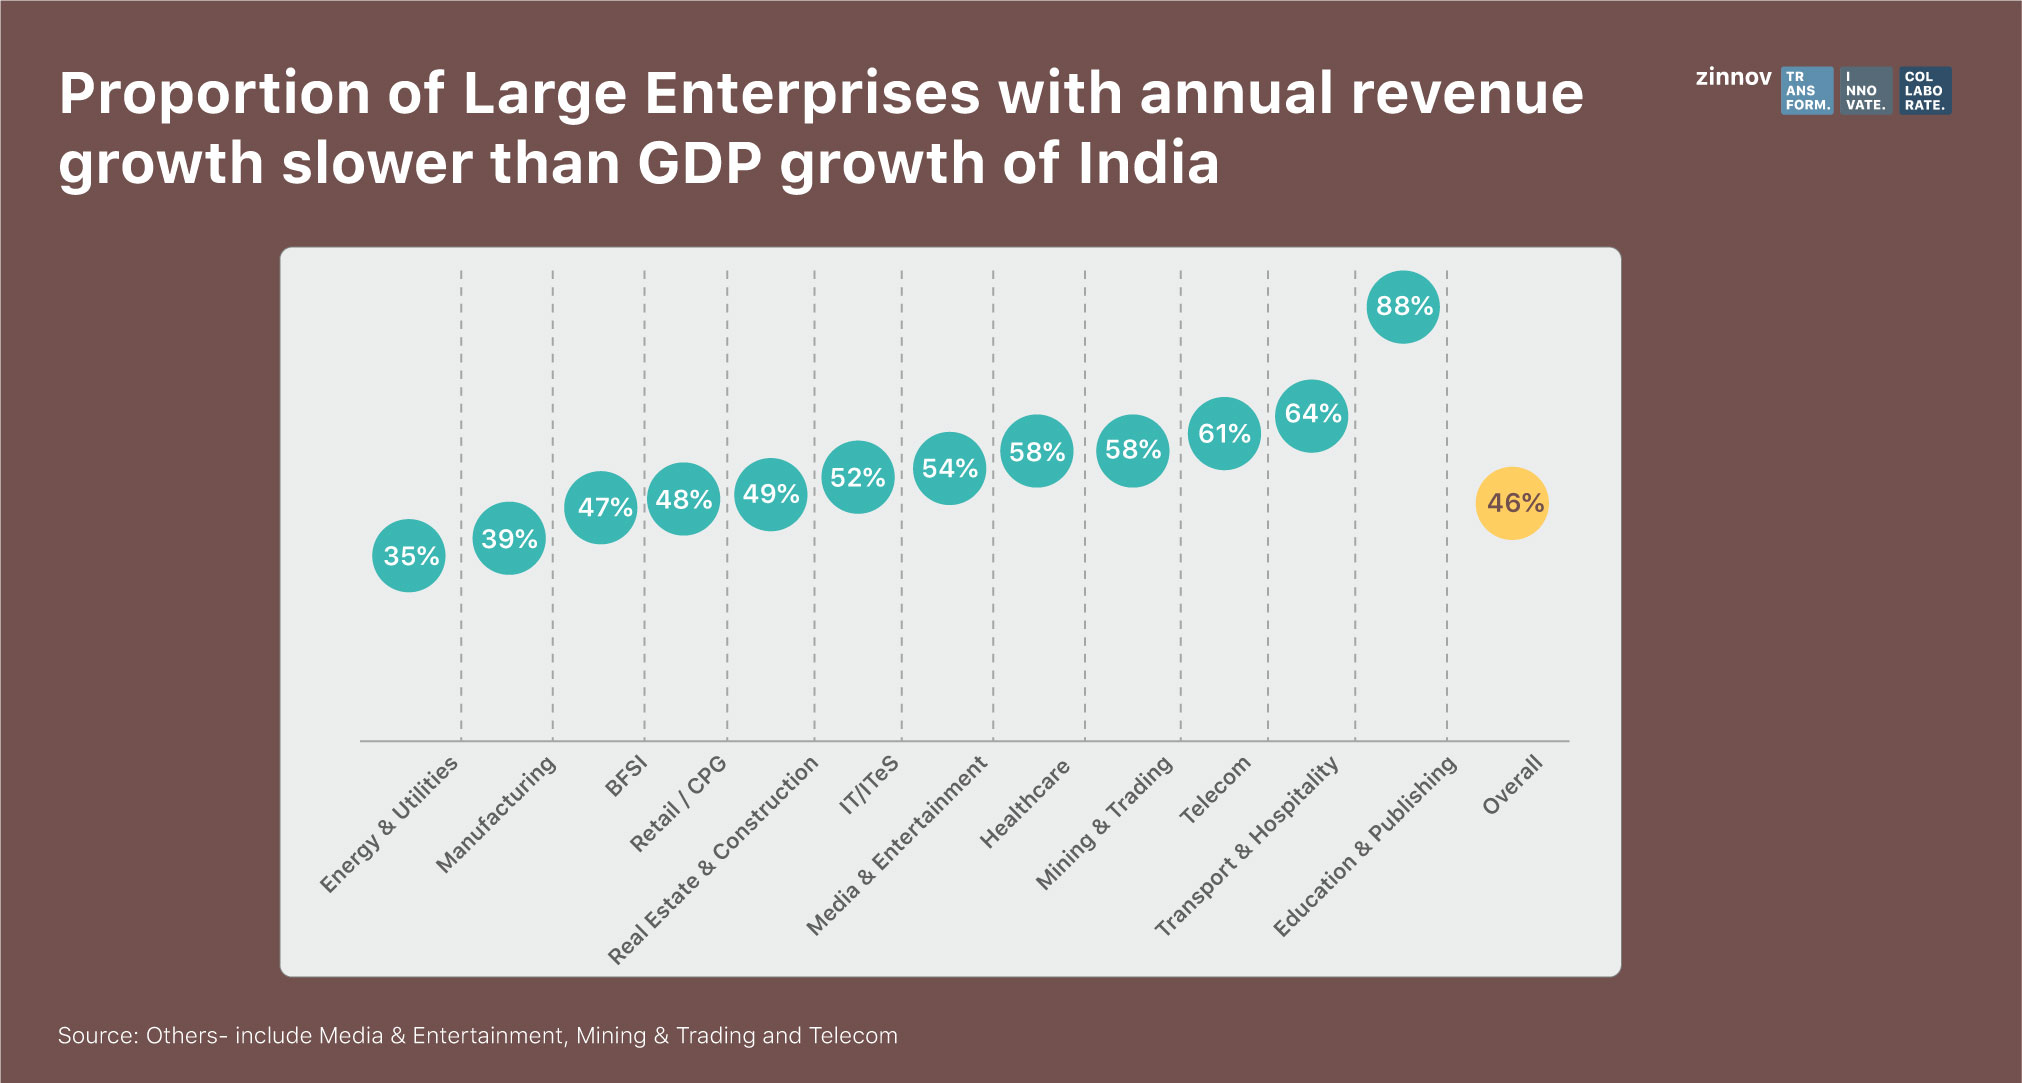  India’s GDP growth